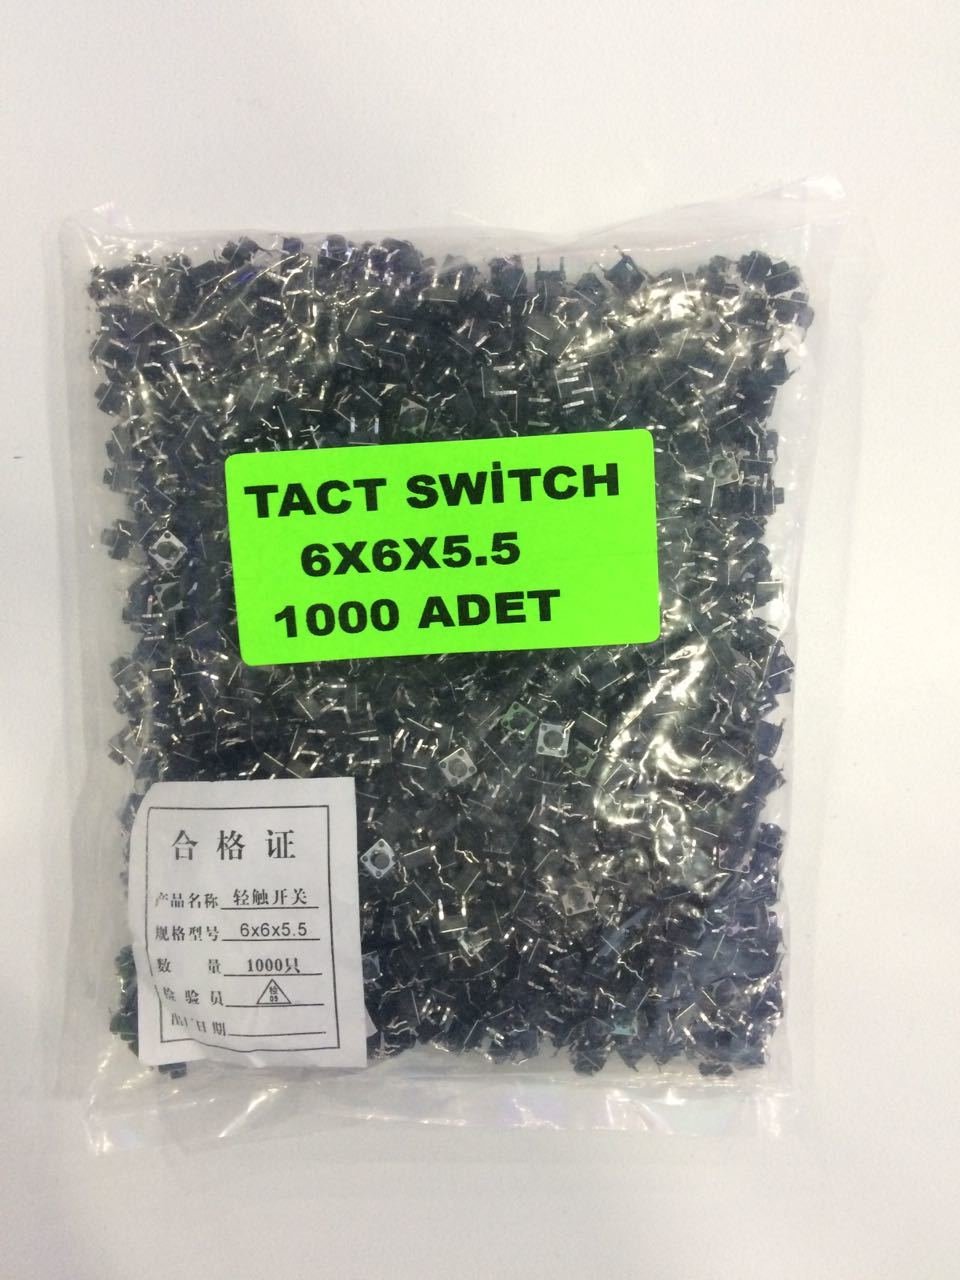 6X6X5.5 Tact Switch 1000 Adet